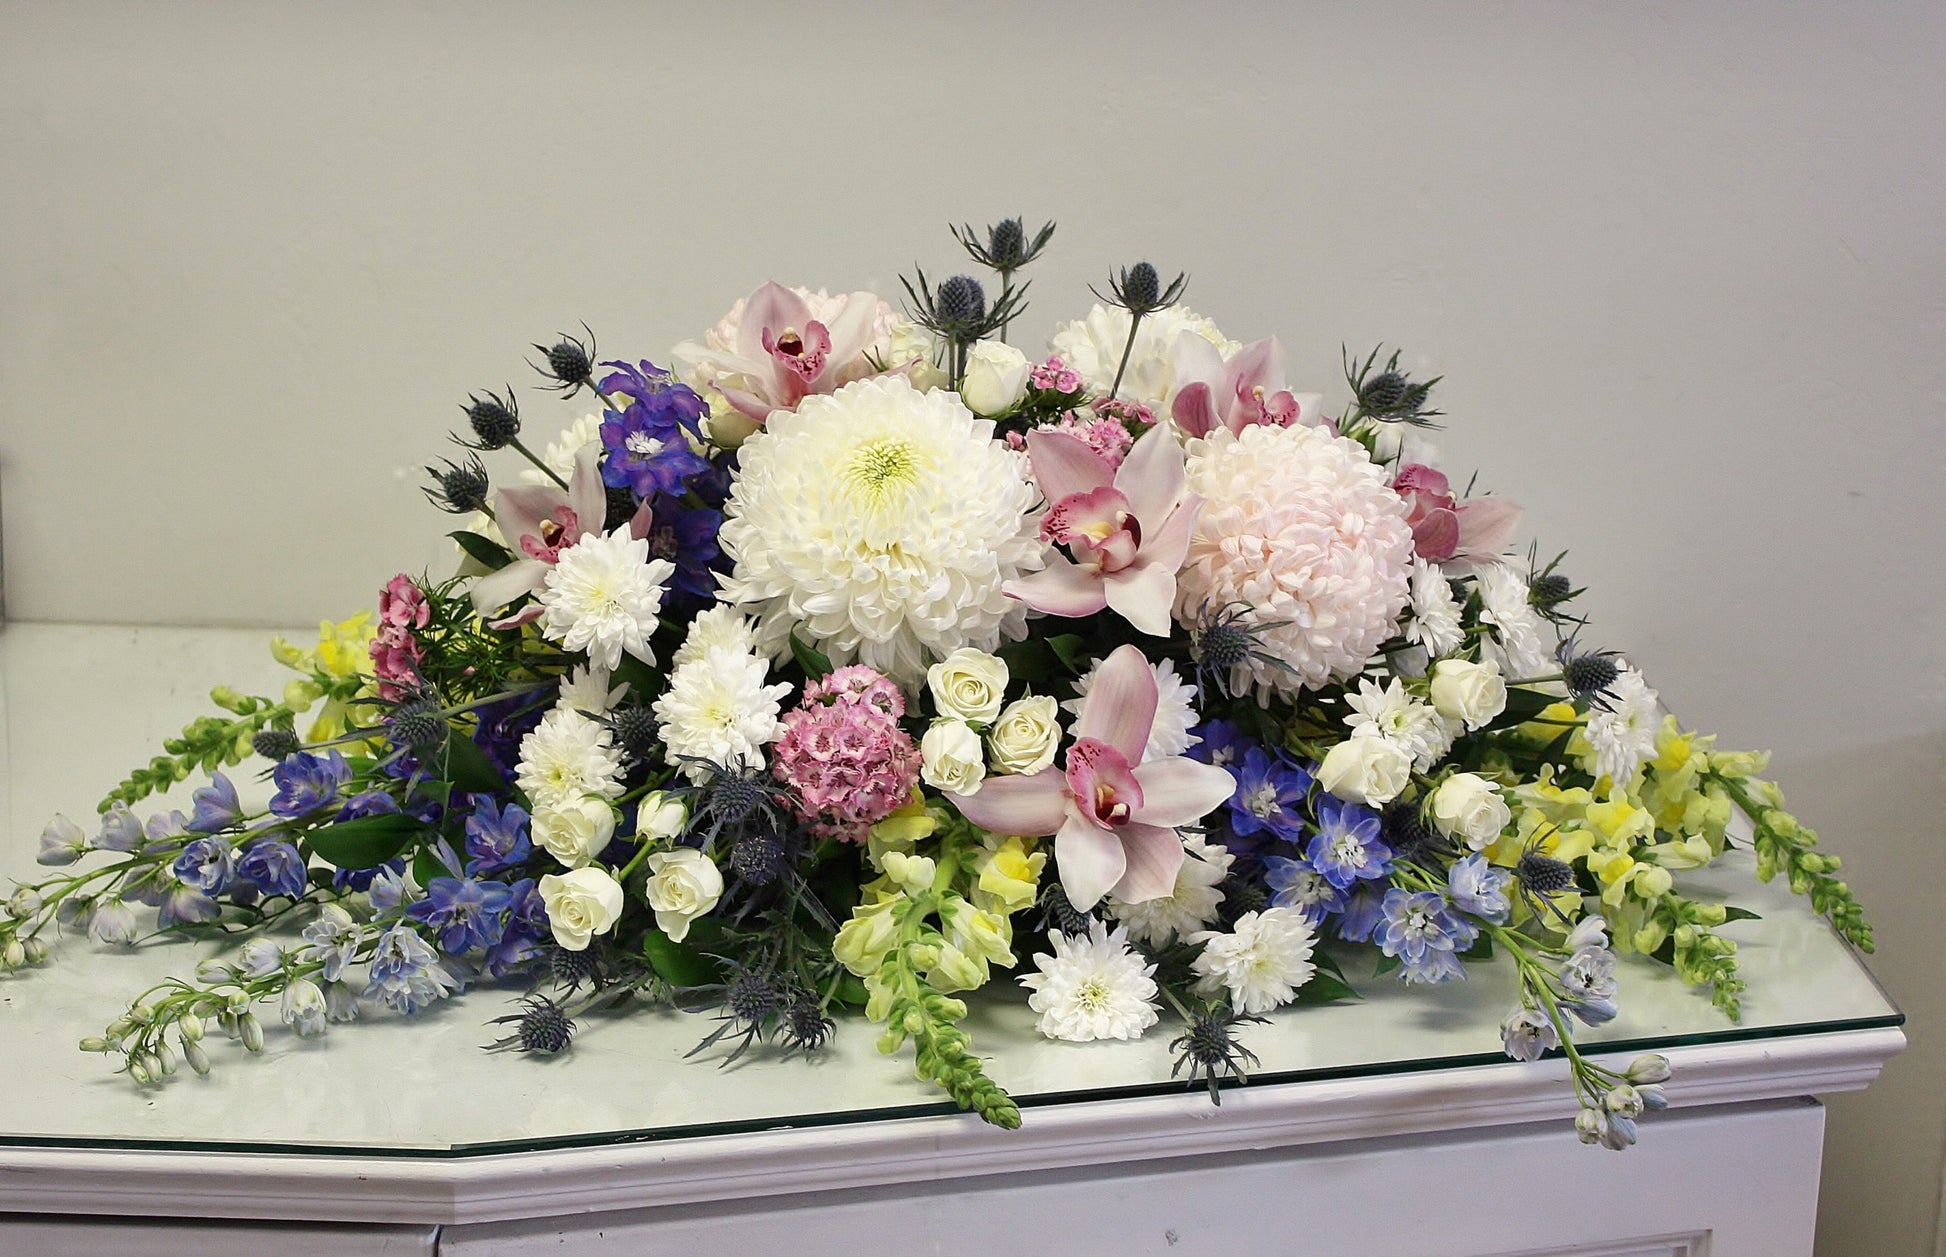 casket spray oleander floral design toronto same day flower delivery sympathy funeral etobicoke white and green flowers orchid rose eucalyptus delphinium pink blue yellow